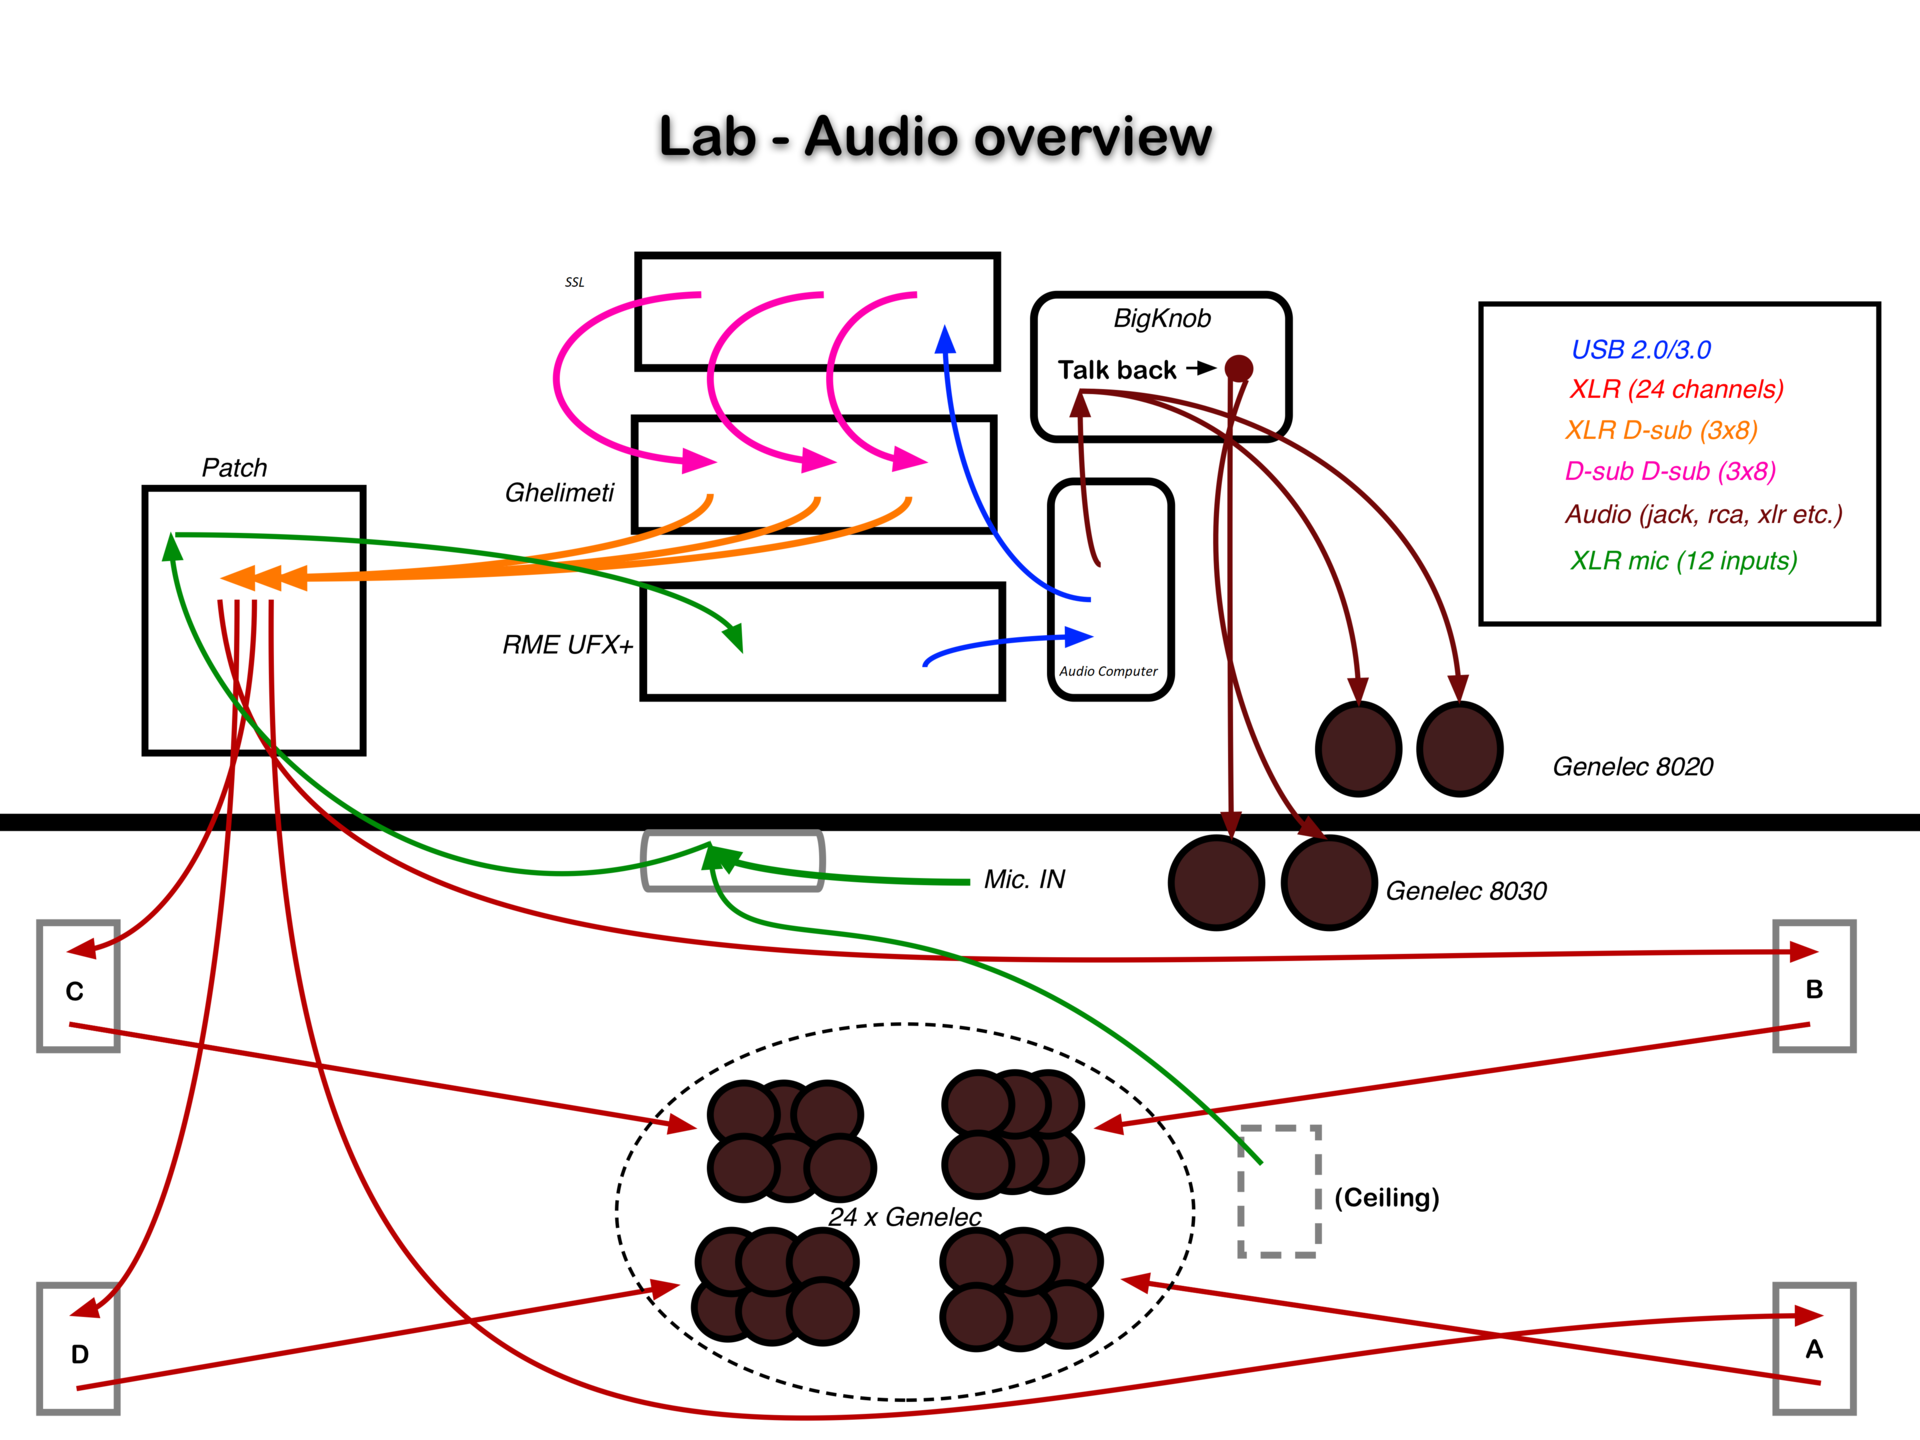 Drawing/diagram of lab audio connections